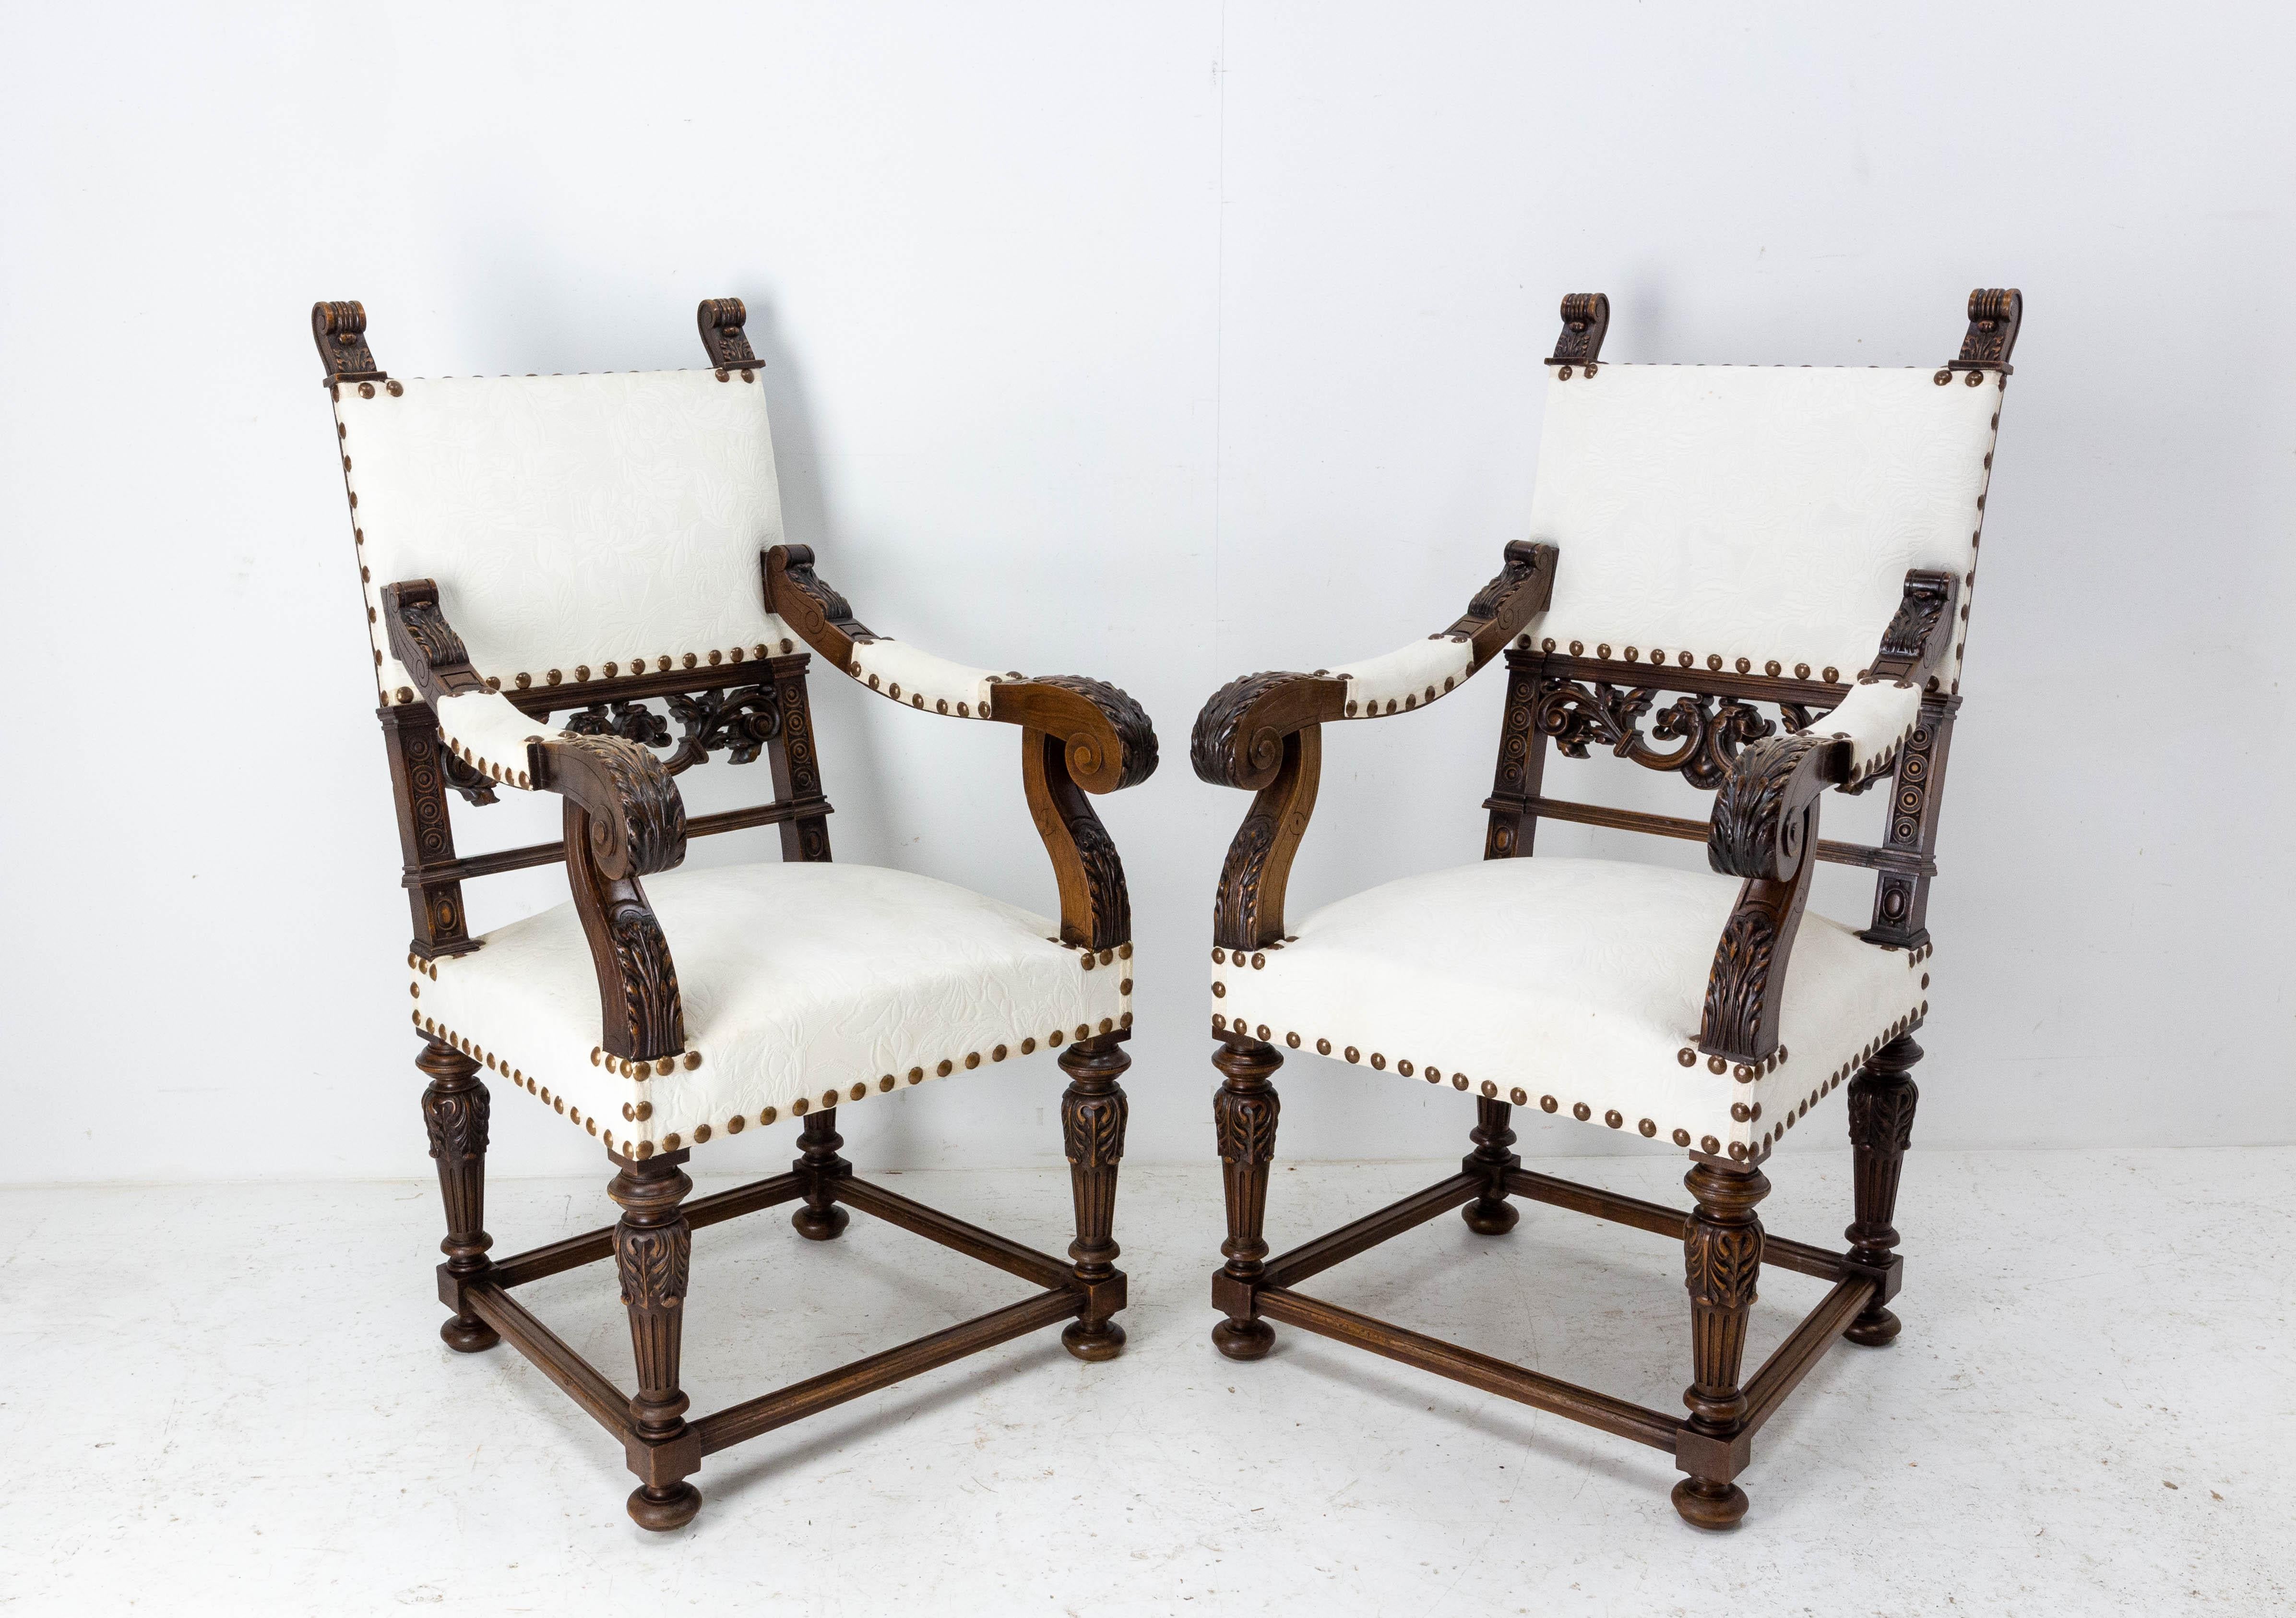 Fabric Pair of Louis XIII Revival Open Walnut Armchairs French, 19th Century to Recover For Sale